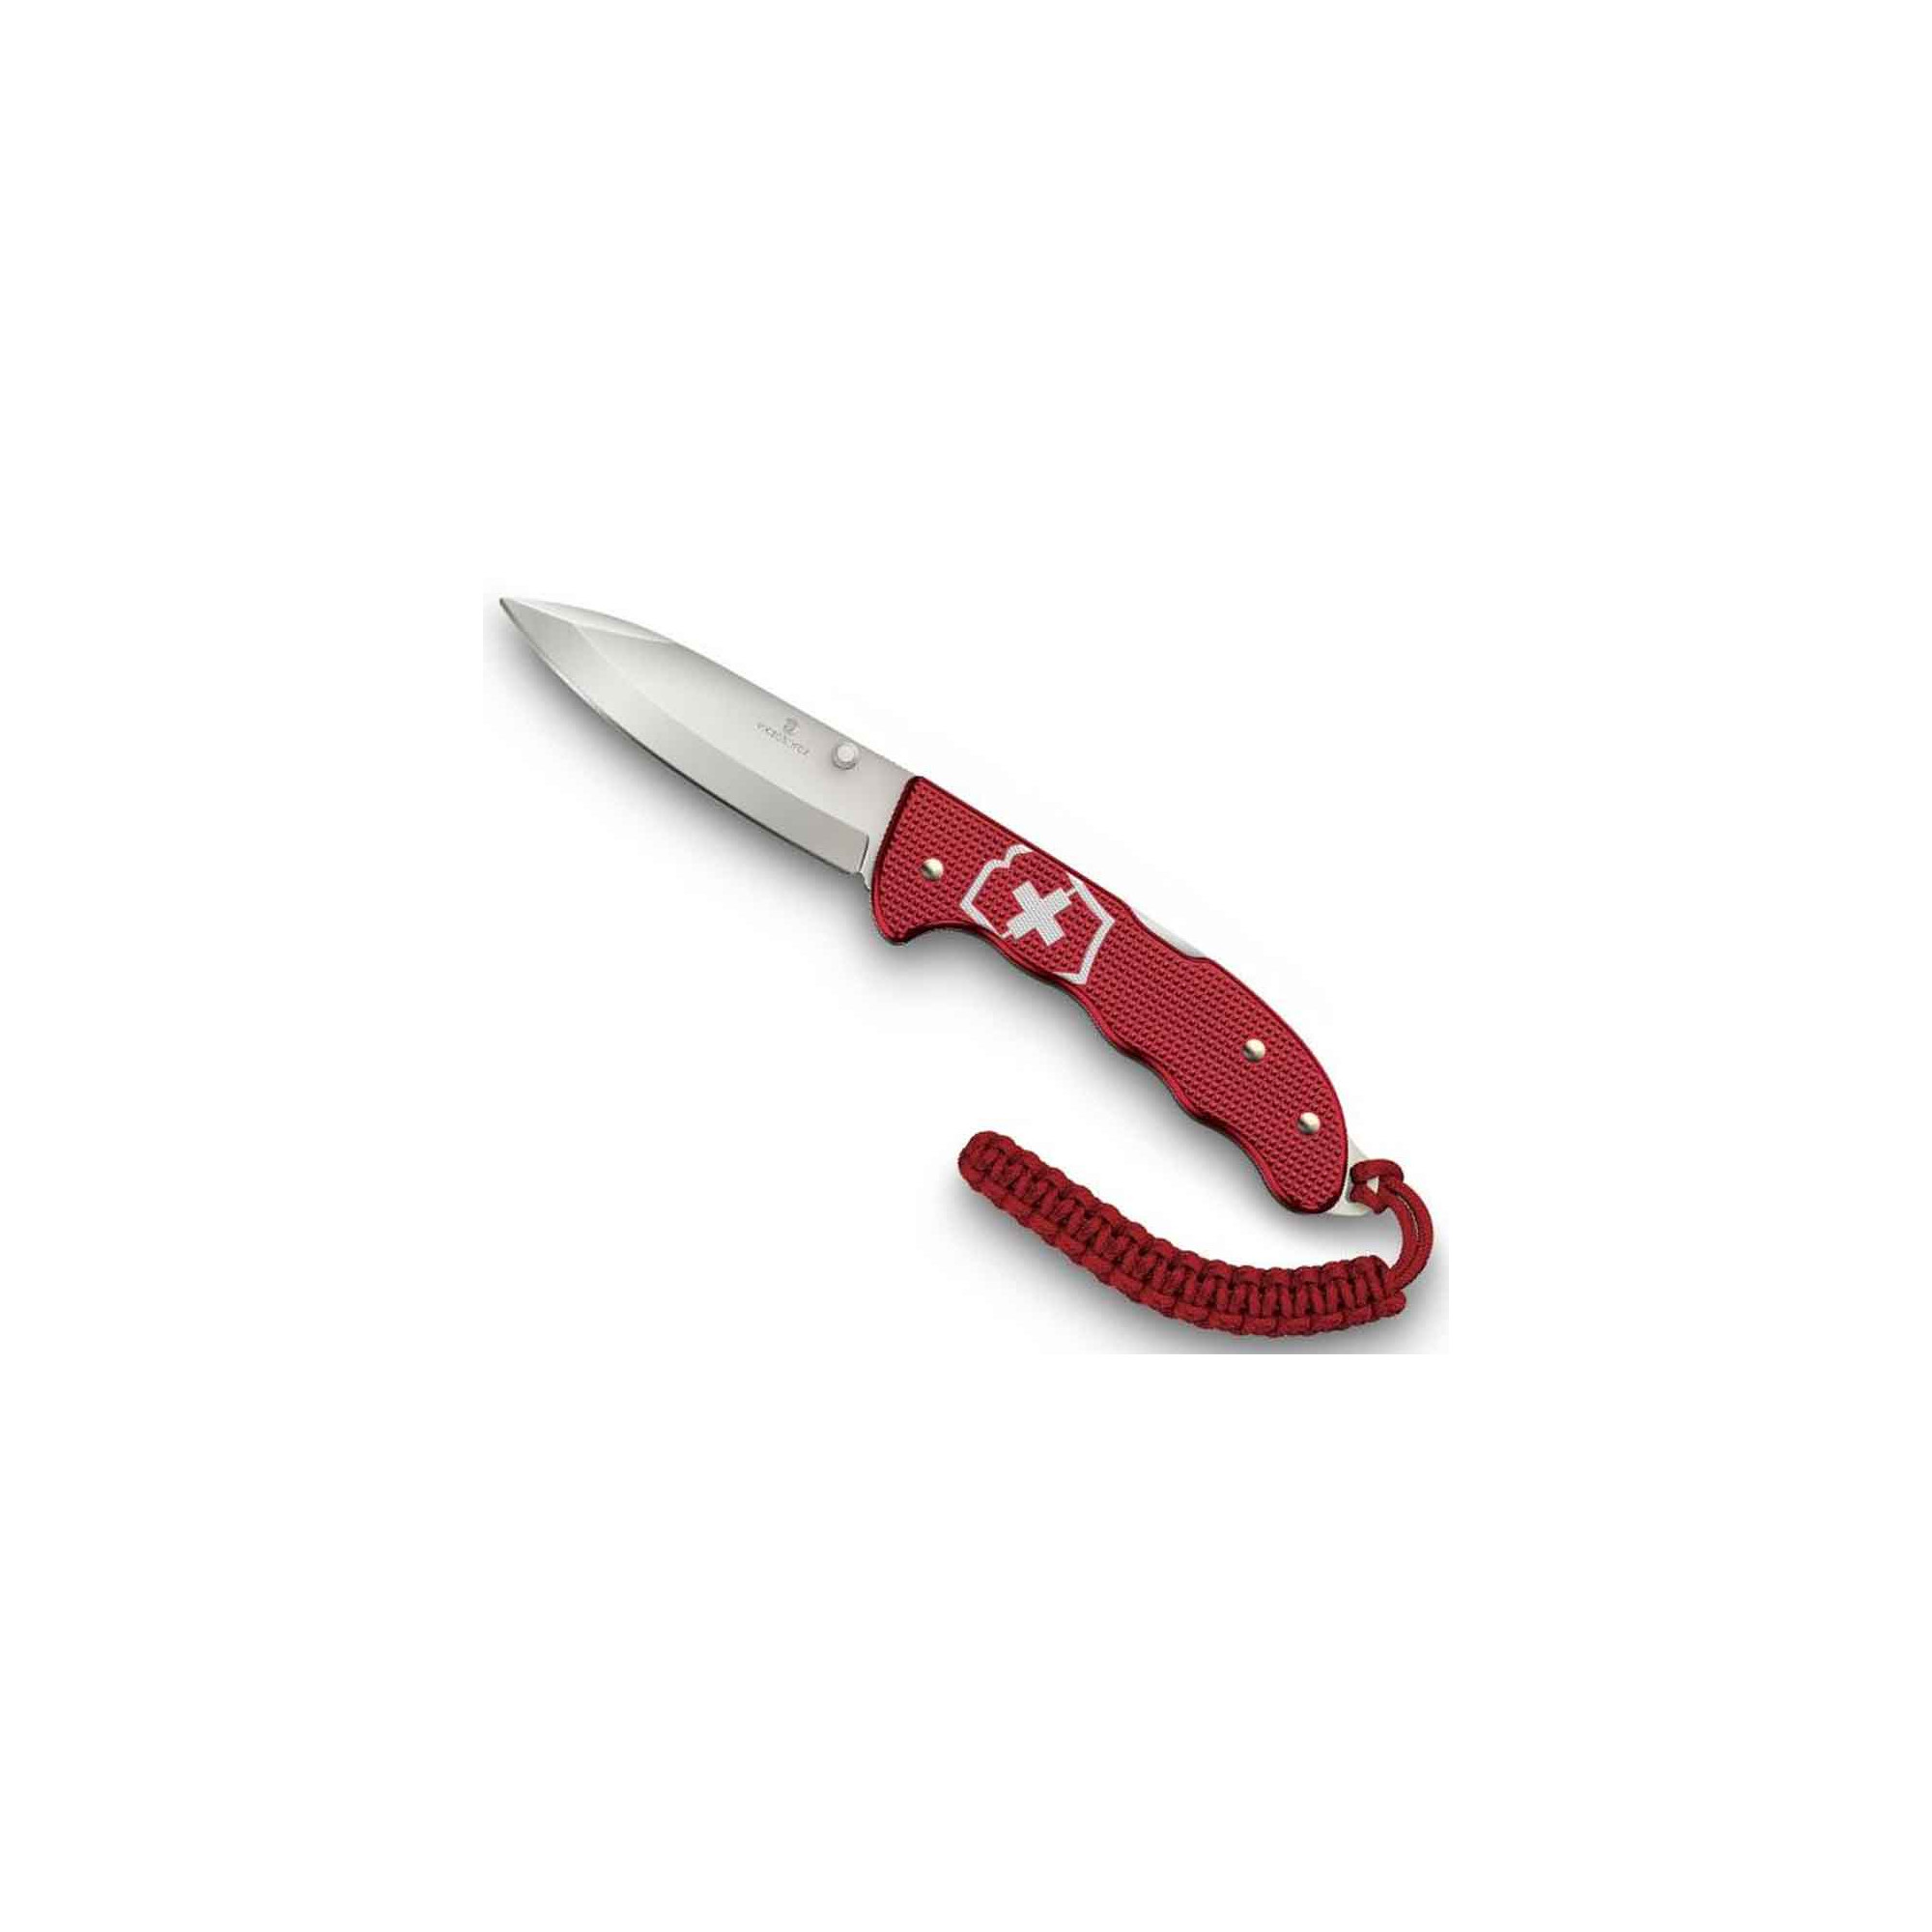 Victorinox Evoke Hunter Pro knife with button on the blade 7611160228765